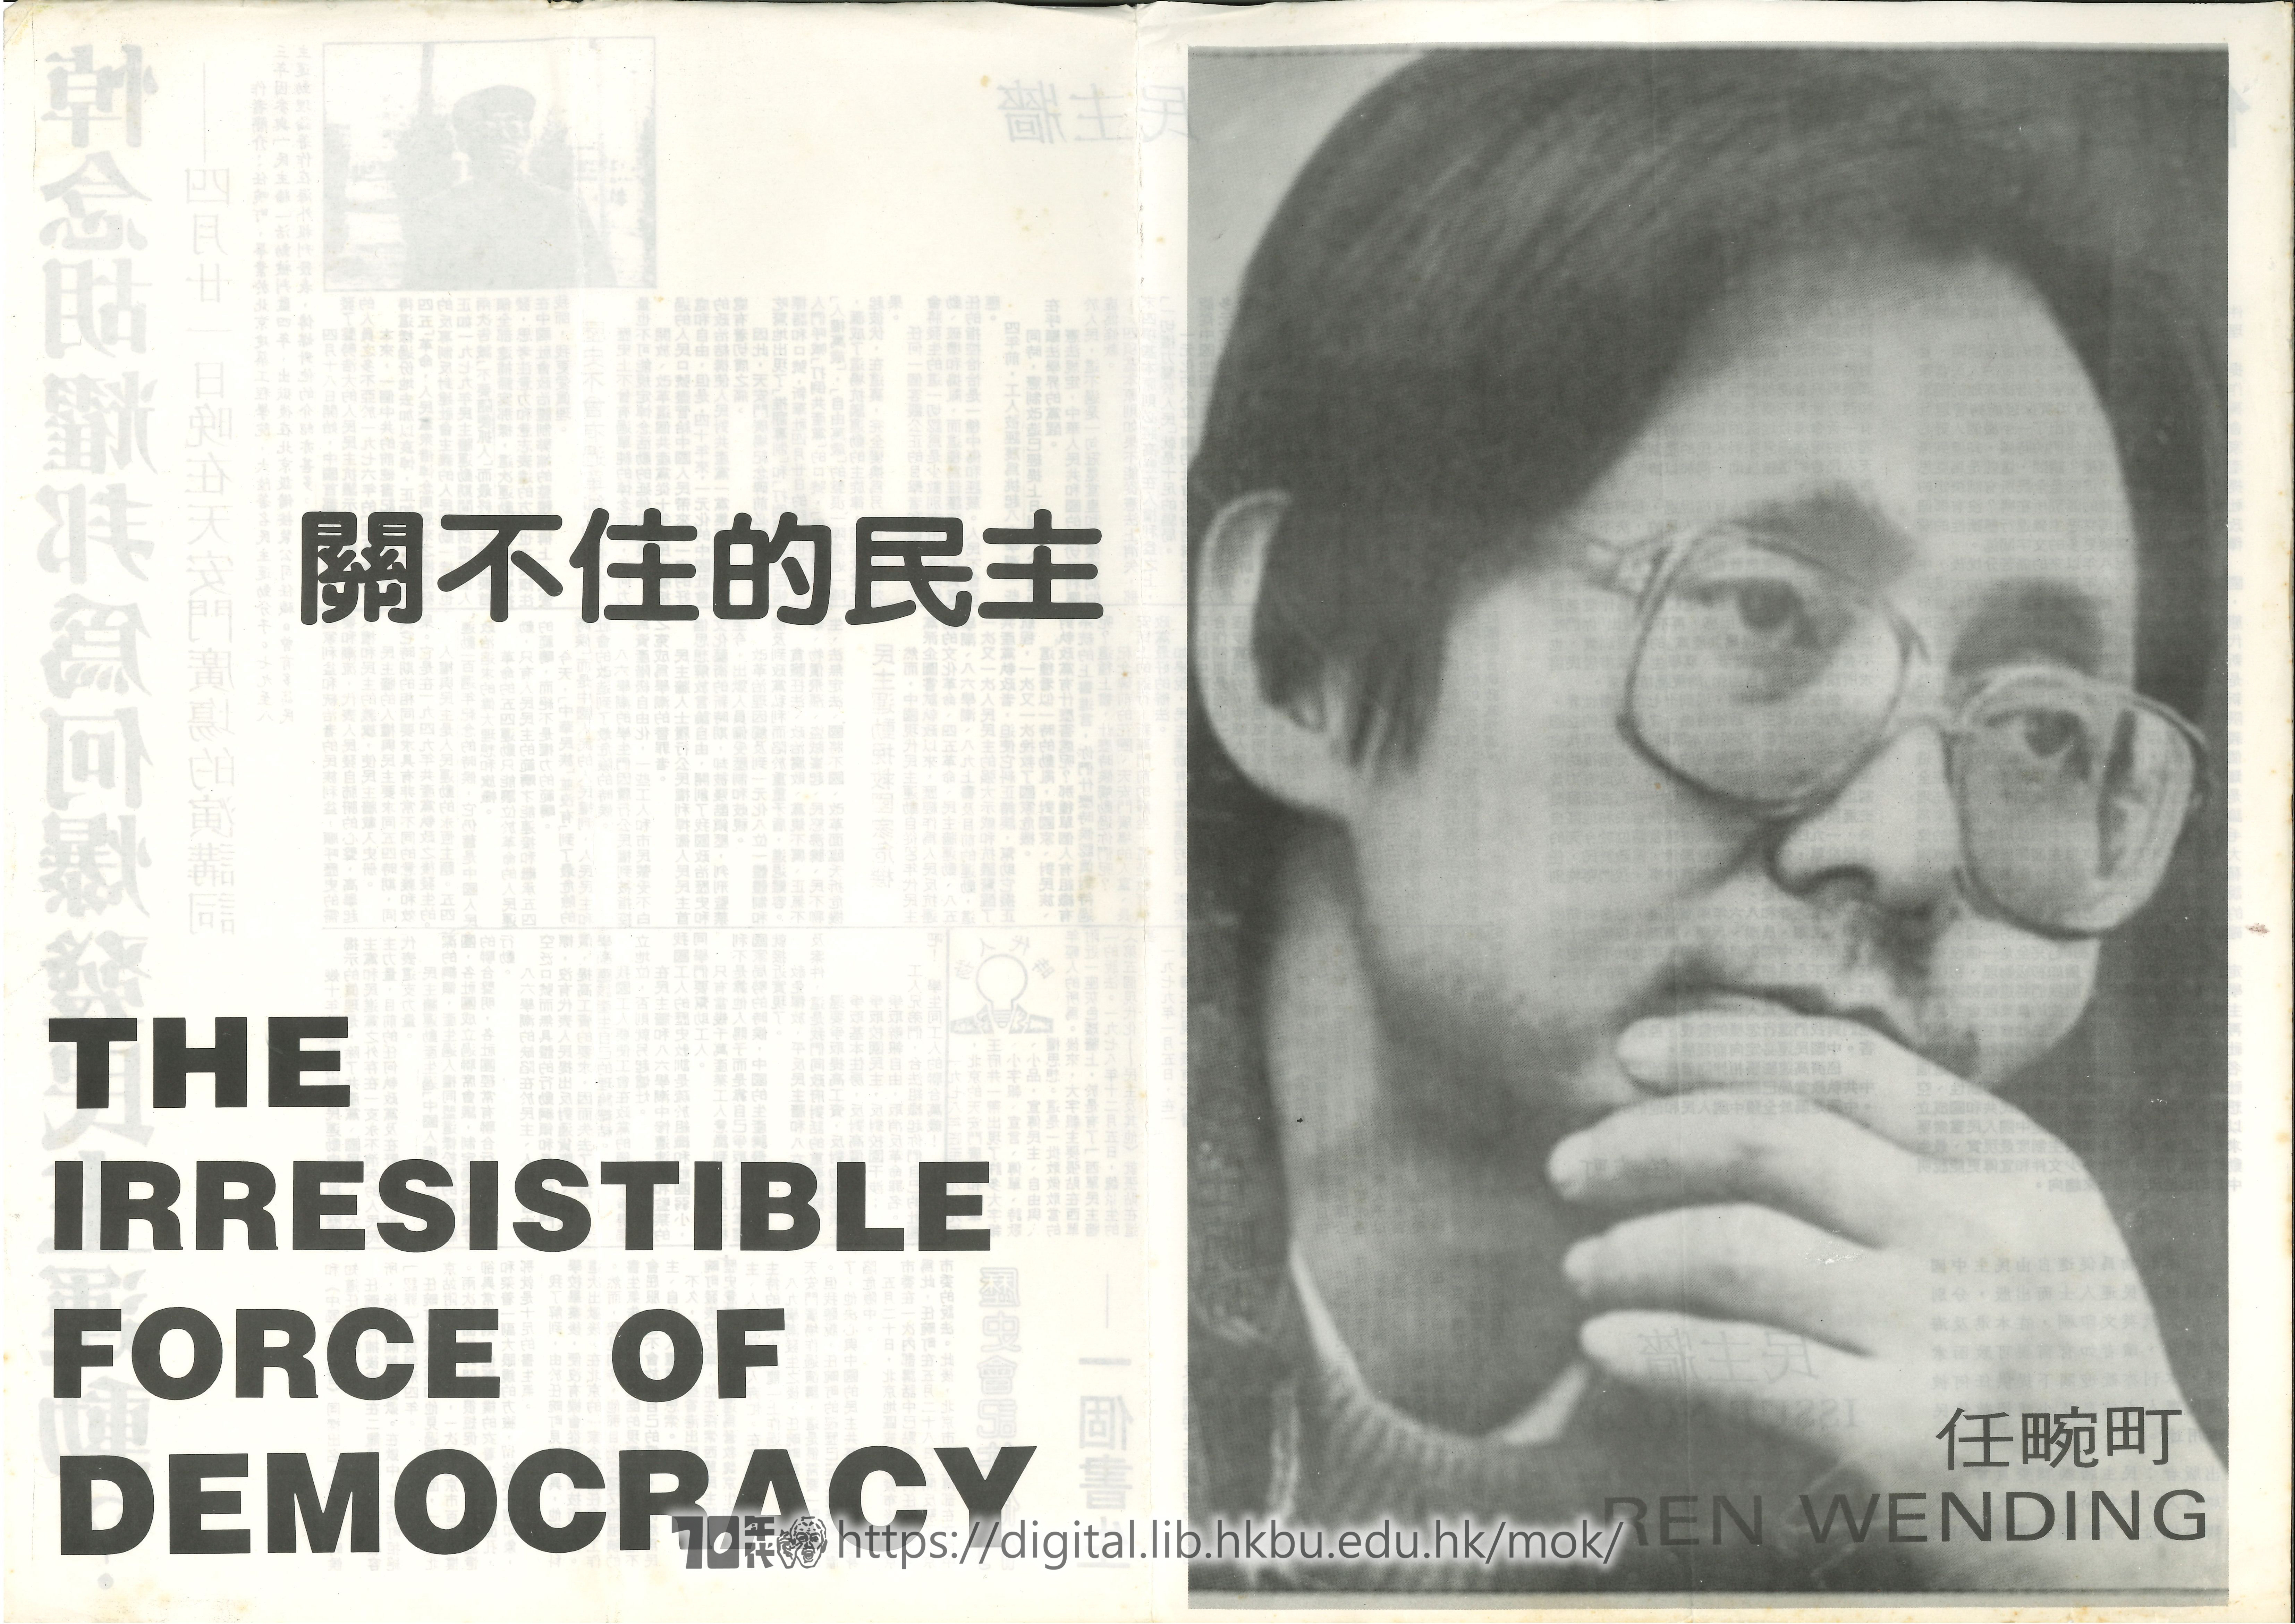  9 The Irresistible Force of Democracy 任畹町 